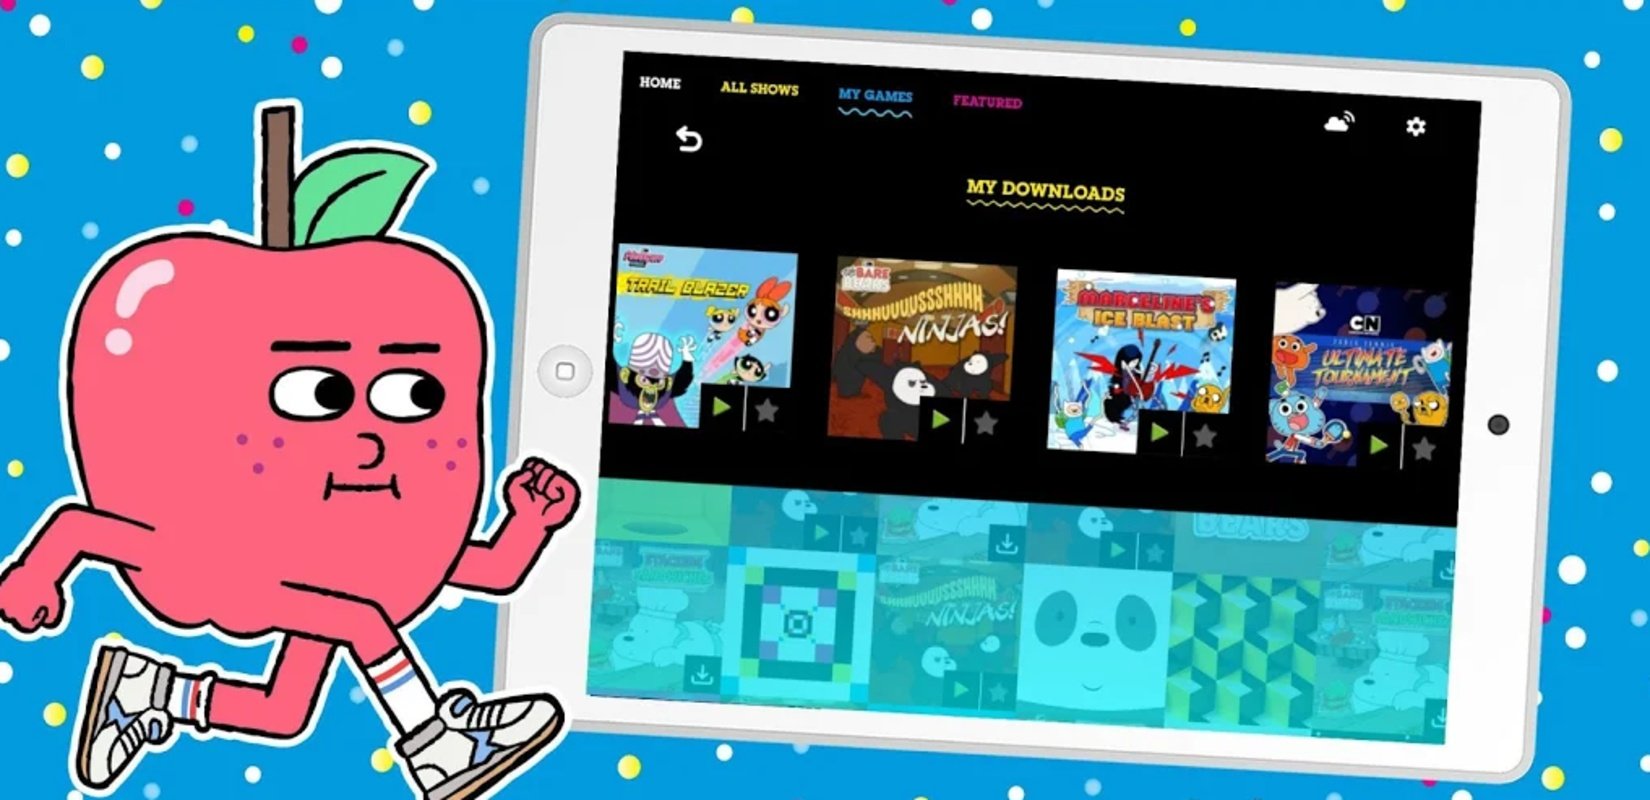 Cartoon Network GameBox for Android - Free App Download